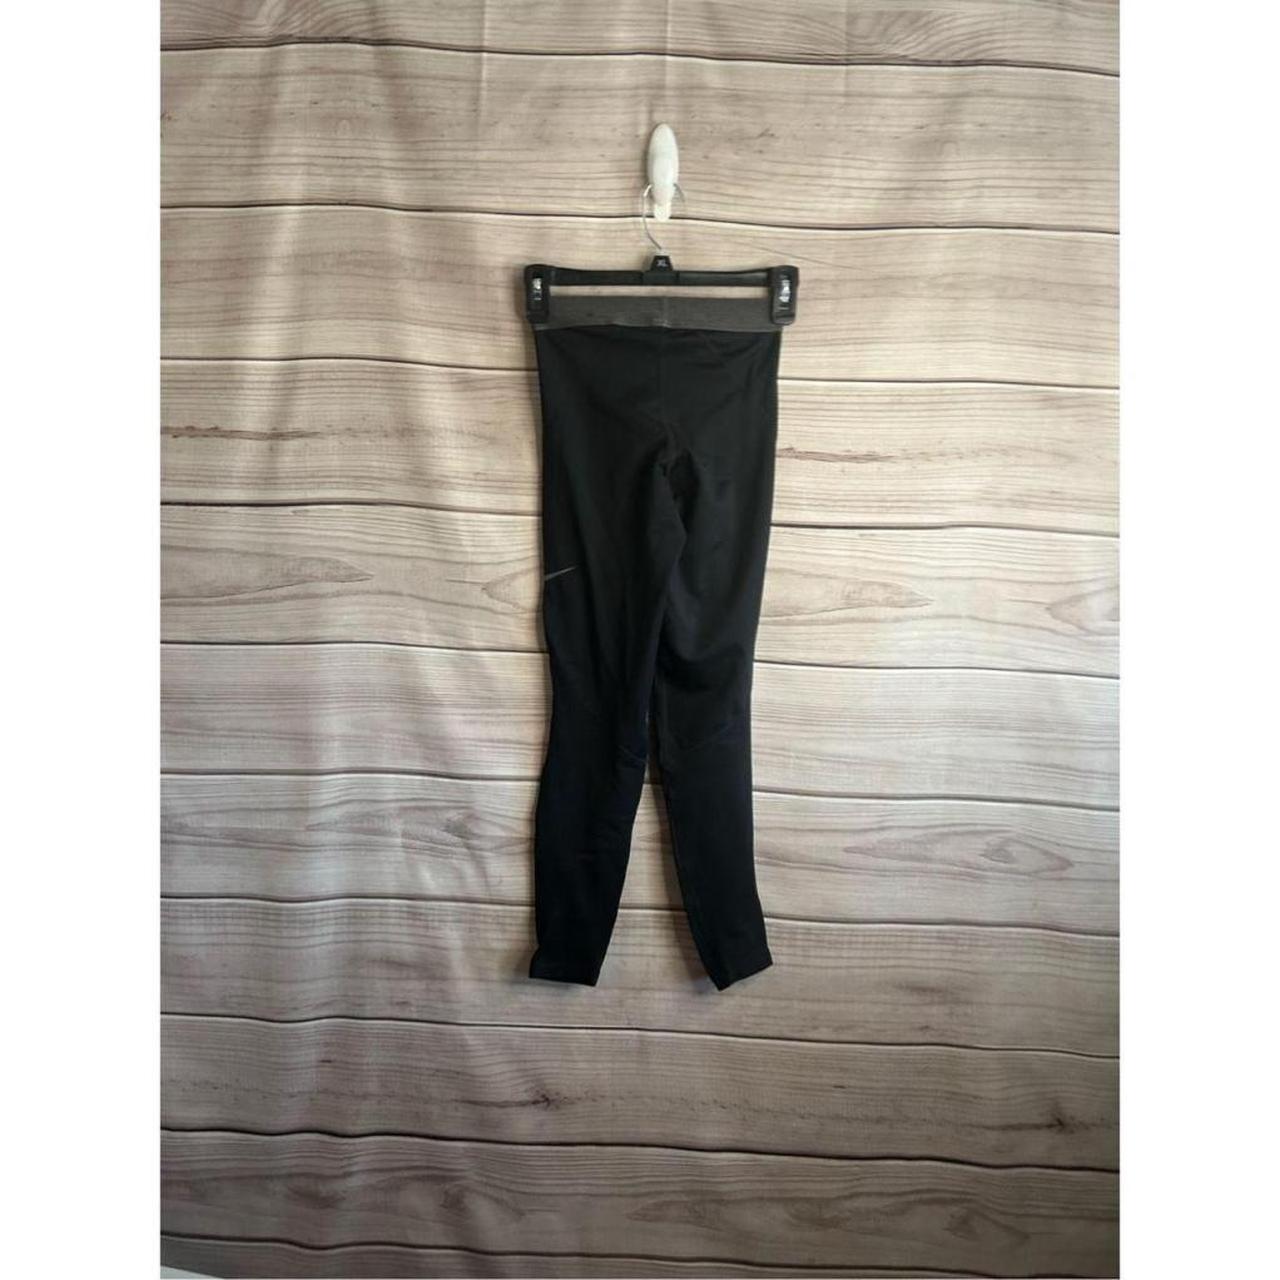 Nike Pro Warm Leggings Looking for a new addition - Depop